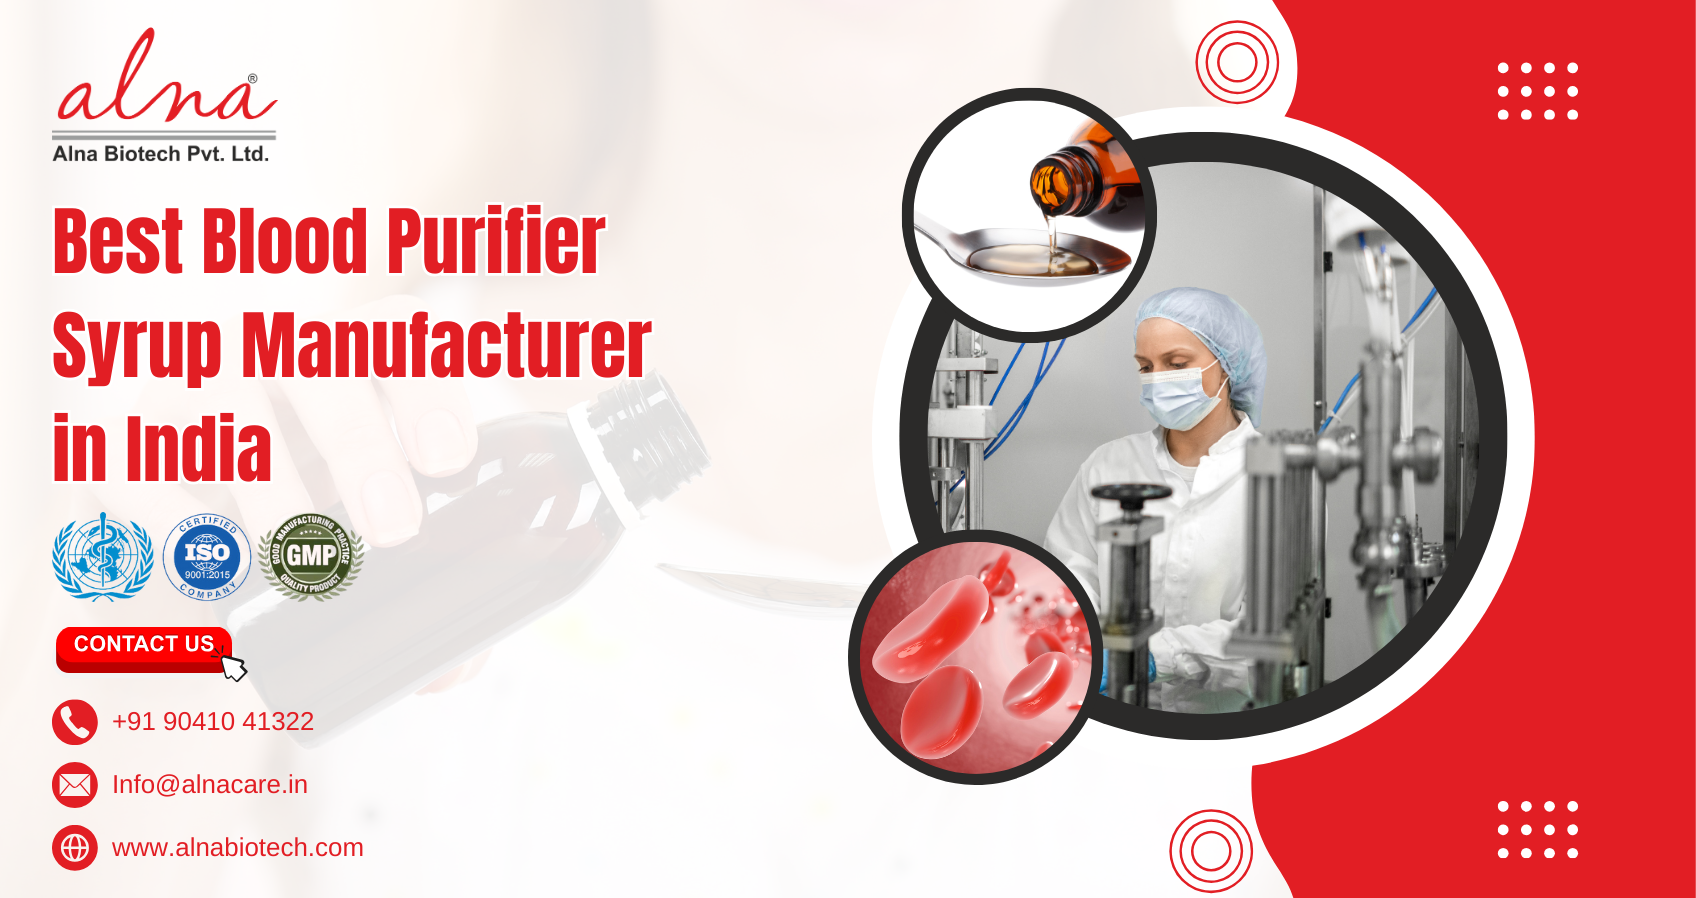 Alna biotech | Best Blood Purifier Syrup Manufacturer in India